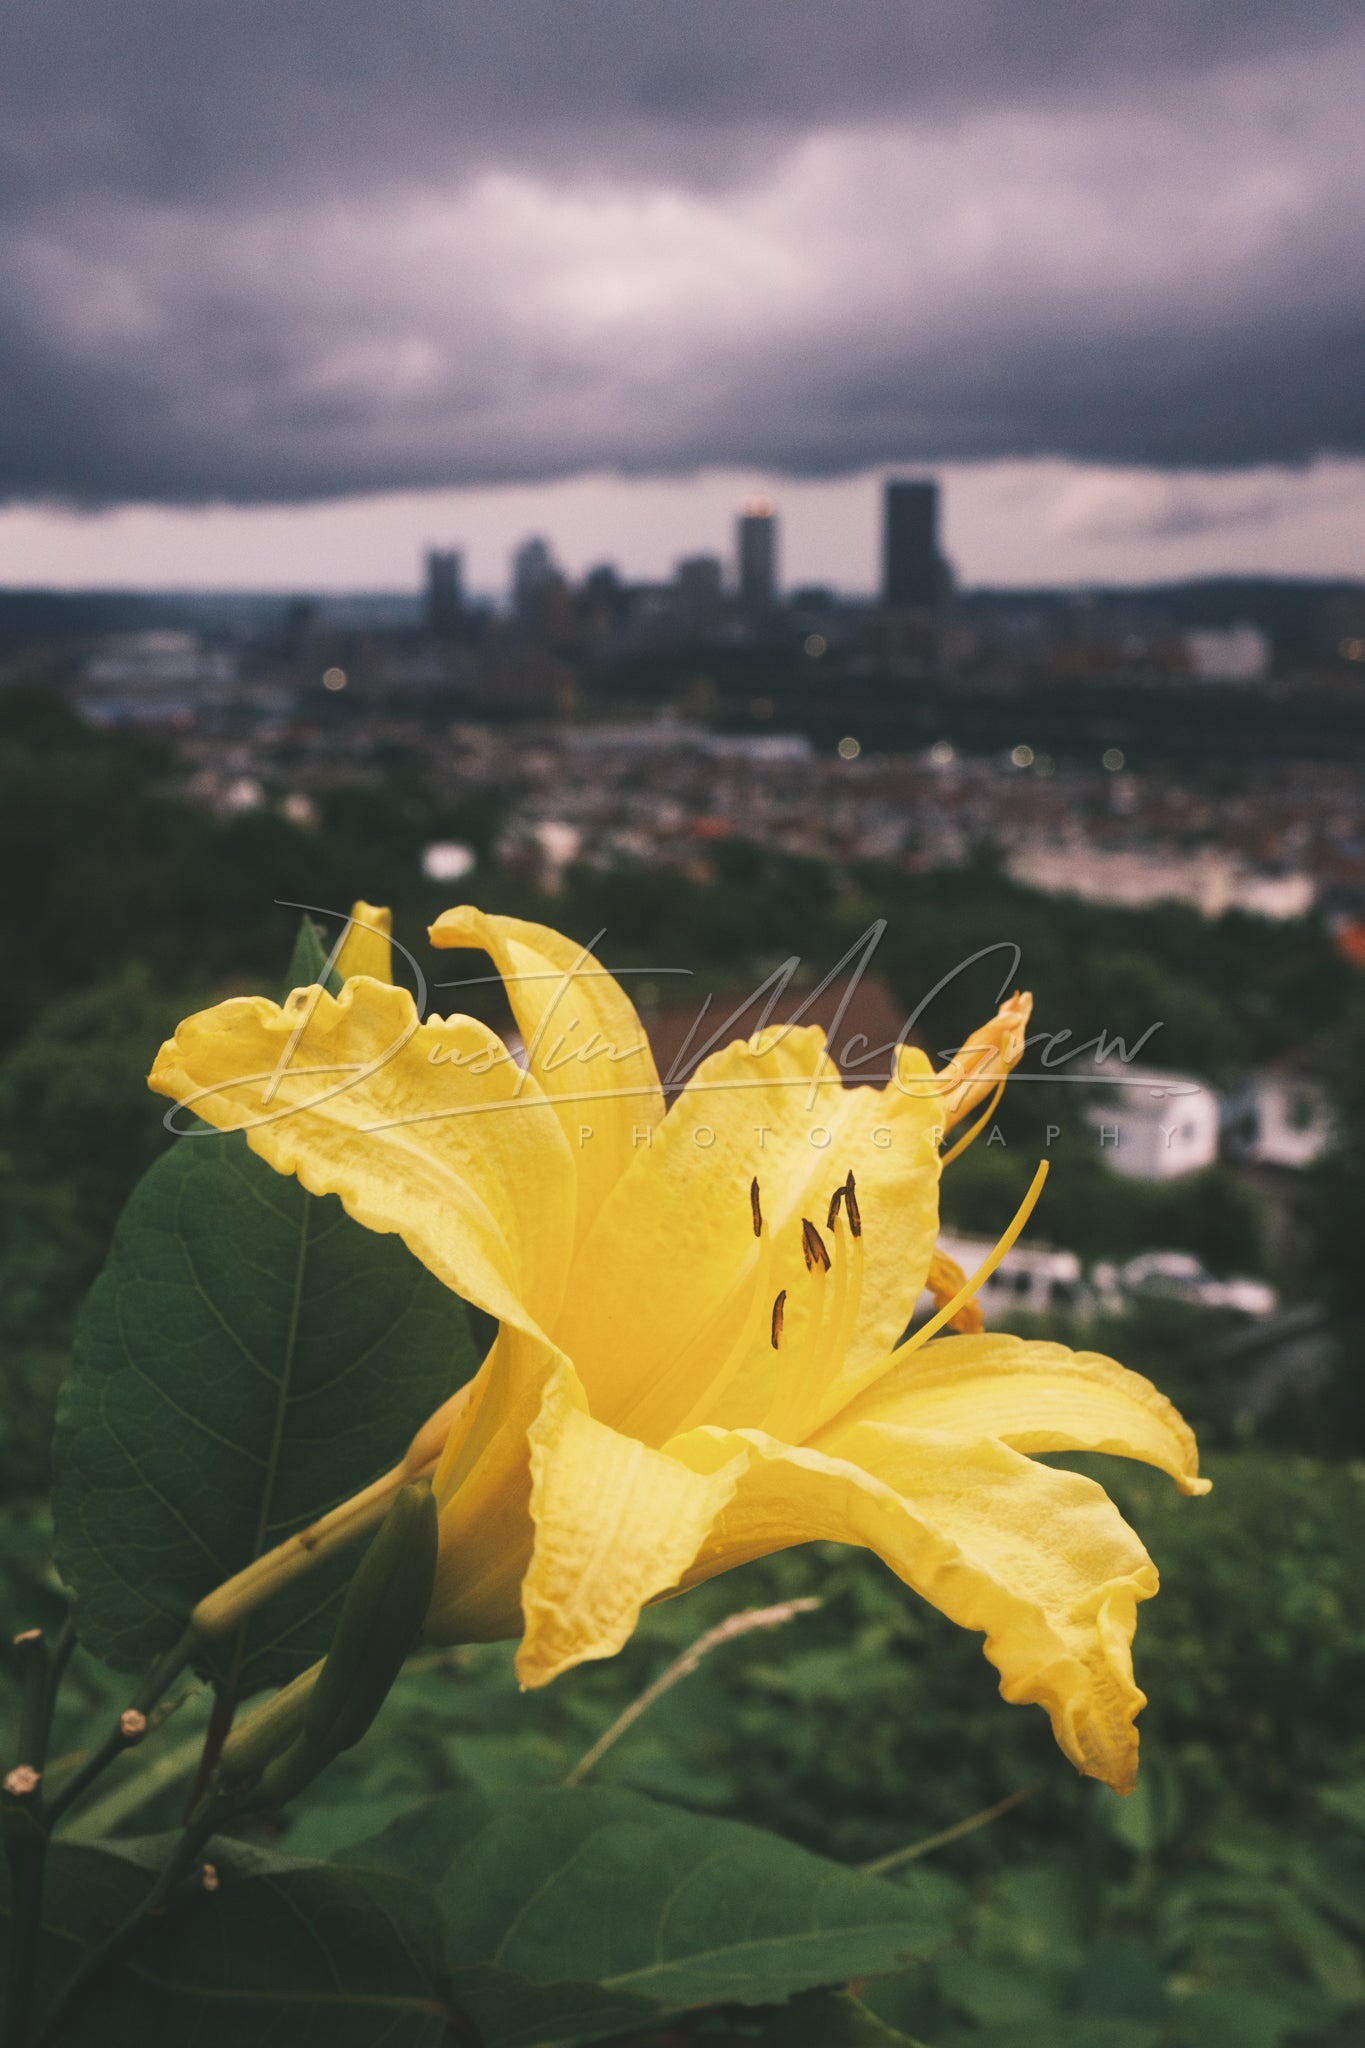 Yellow Flower and Stormy Skies in Pittsburgh